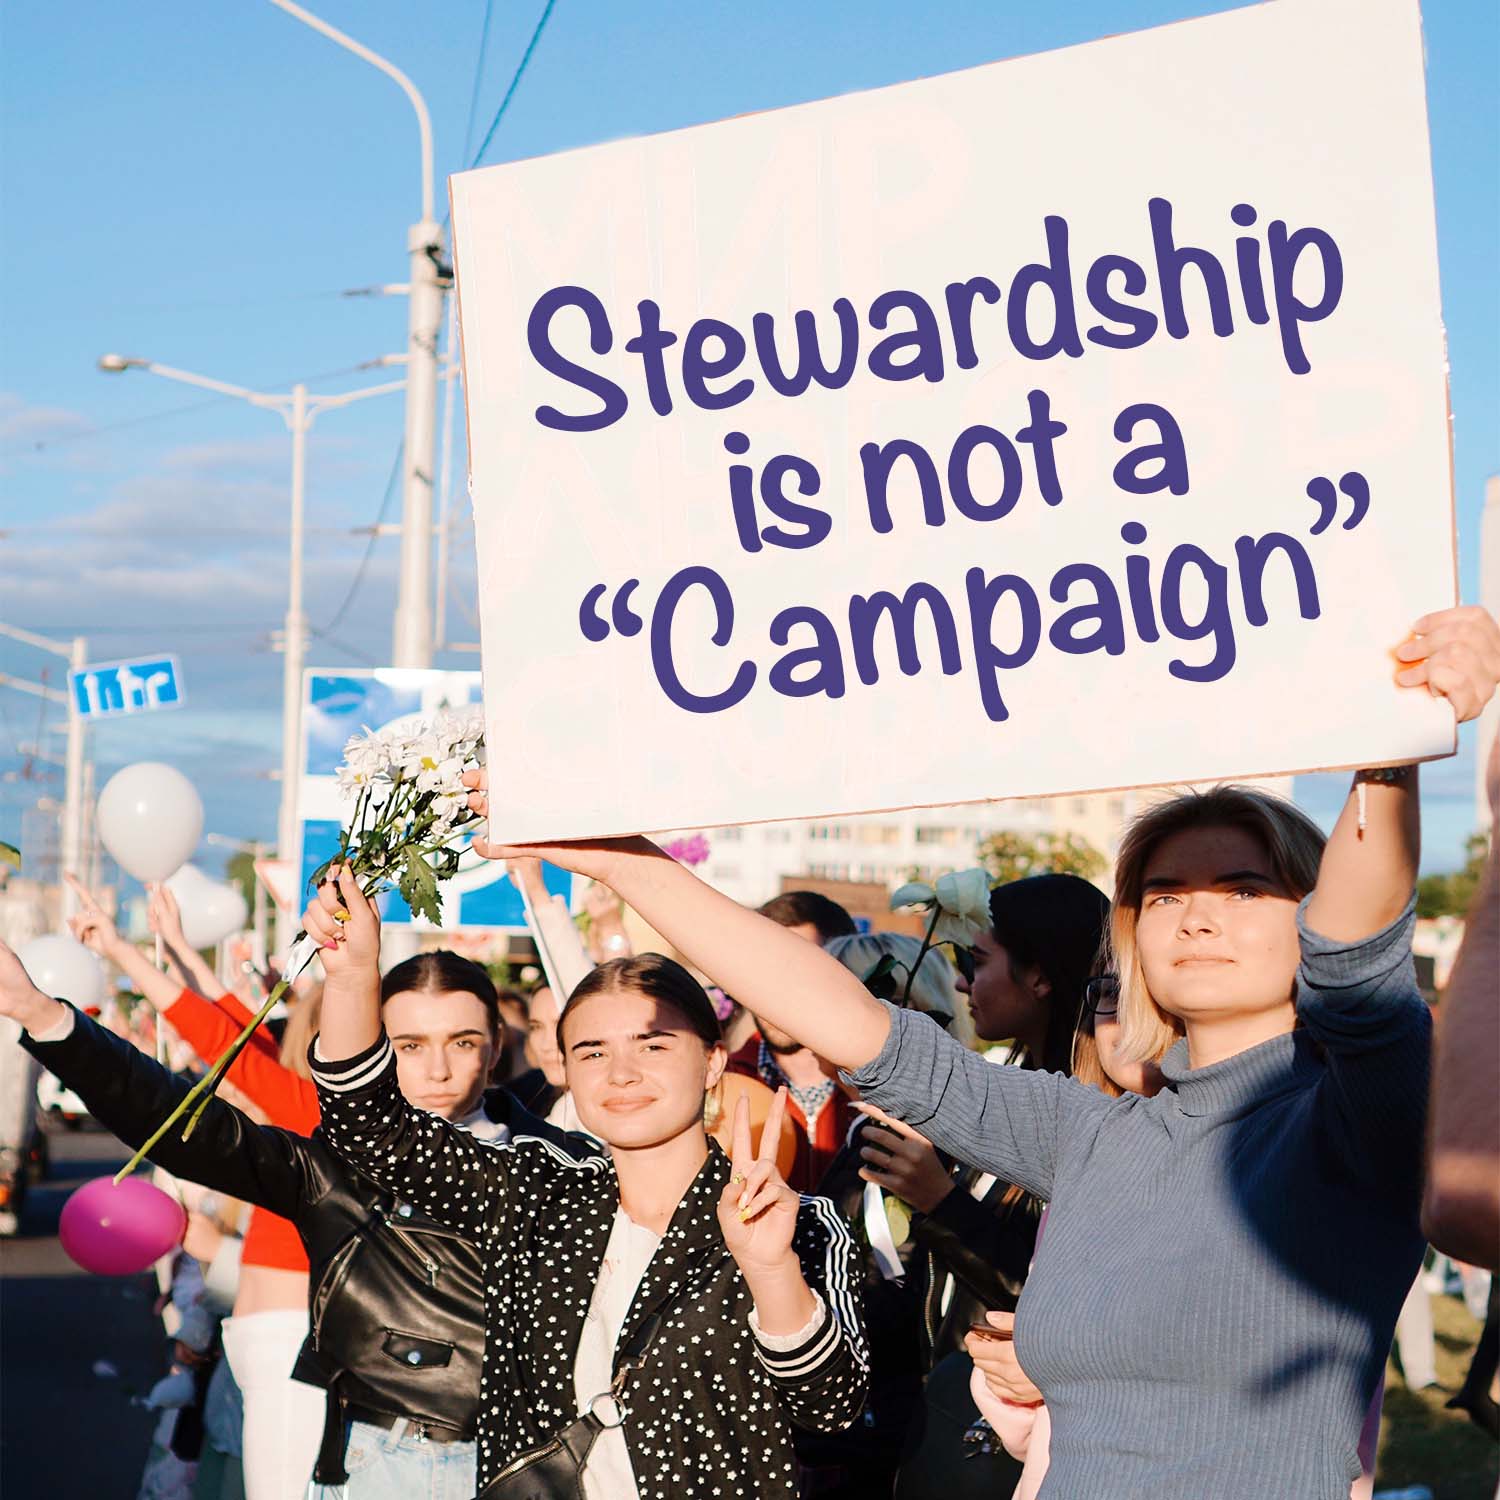 Protestors carrying a sign that says "Stewardship is not a campaign" Moravian MMFA